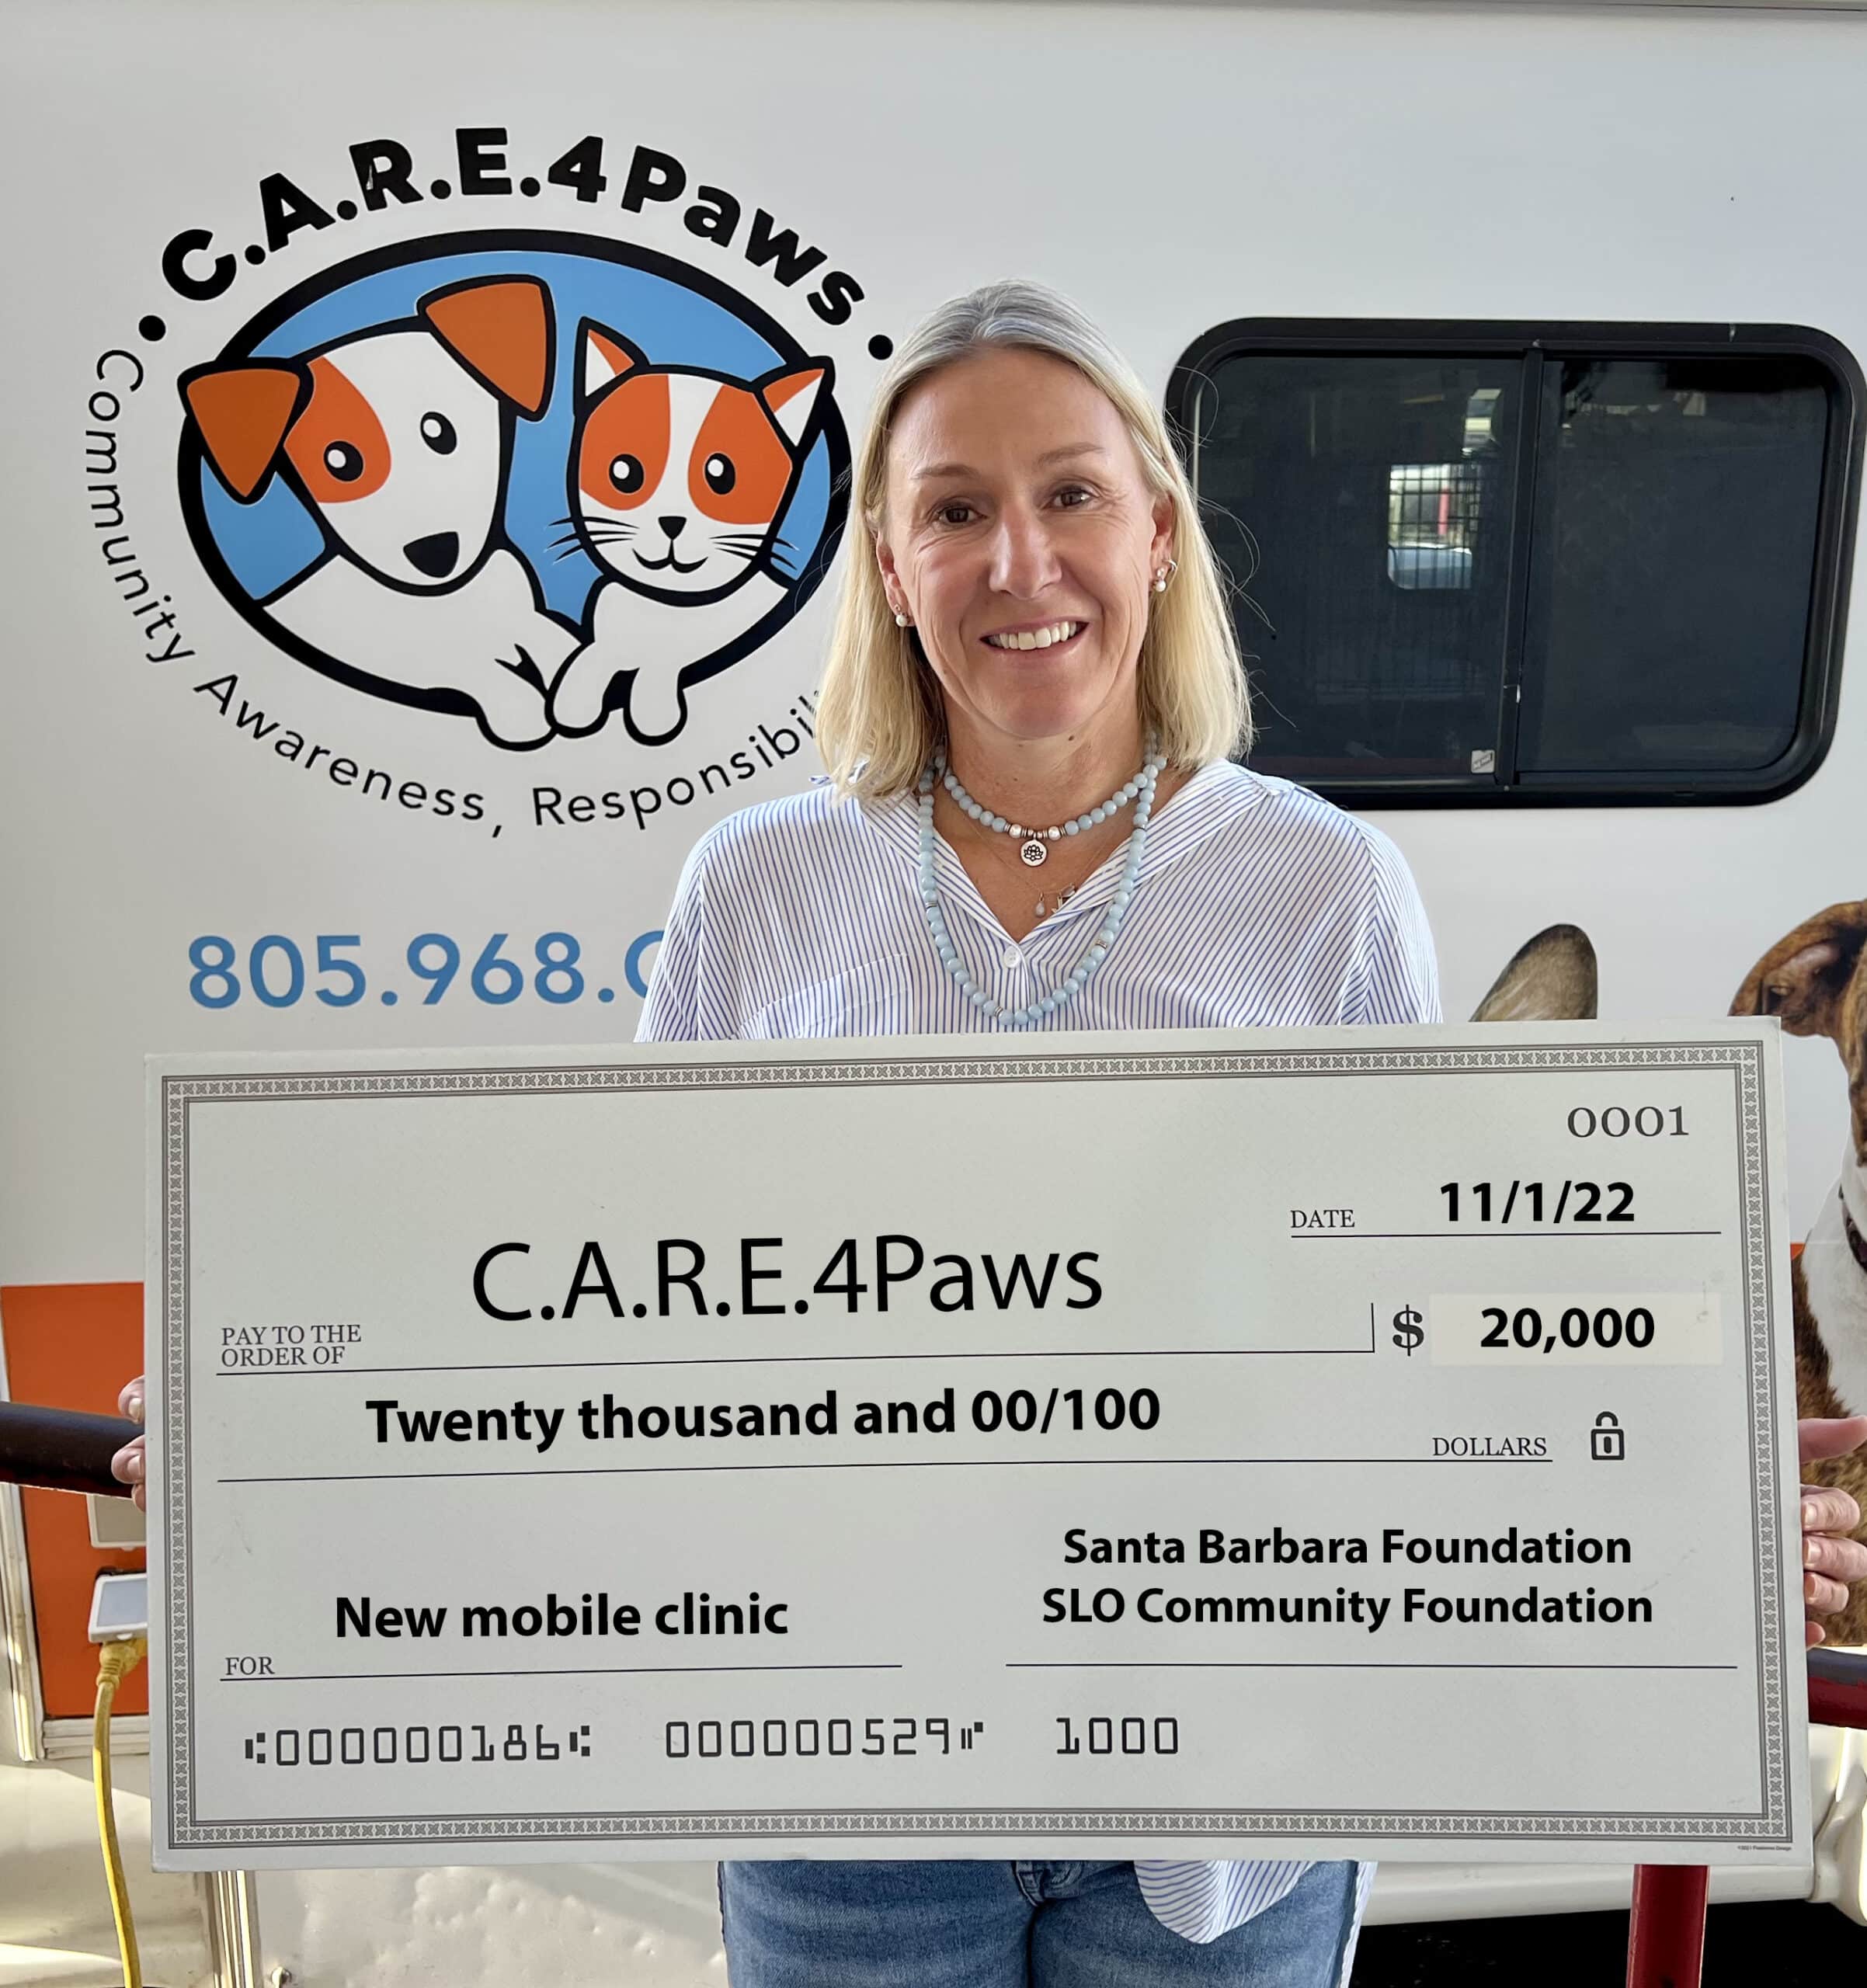 C.A.R.E.4Paws Executive Director holding large donation check